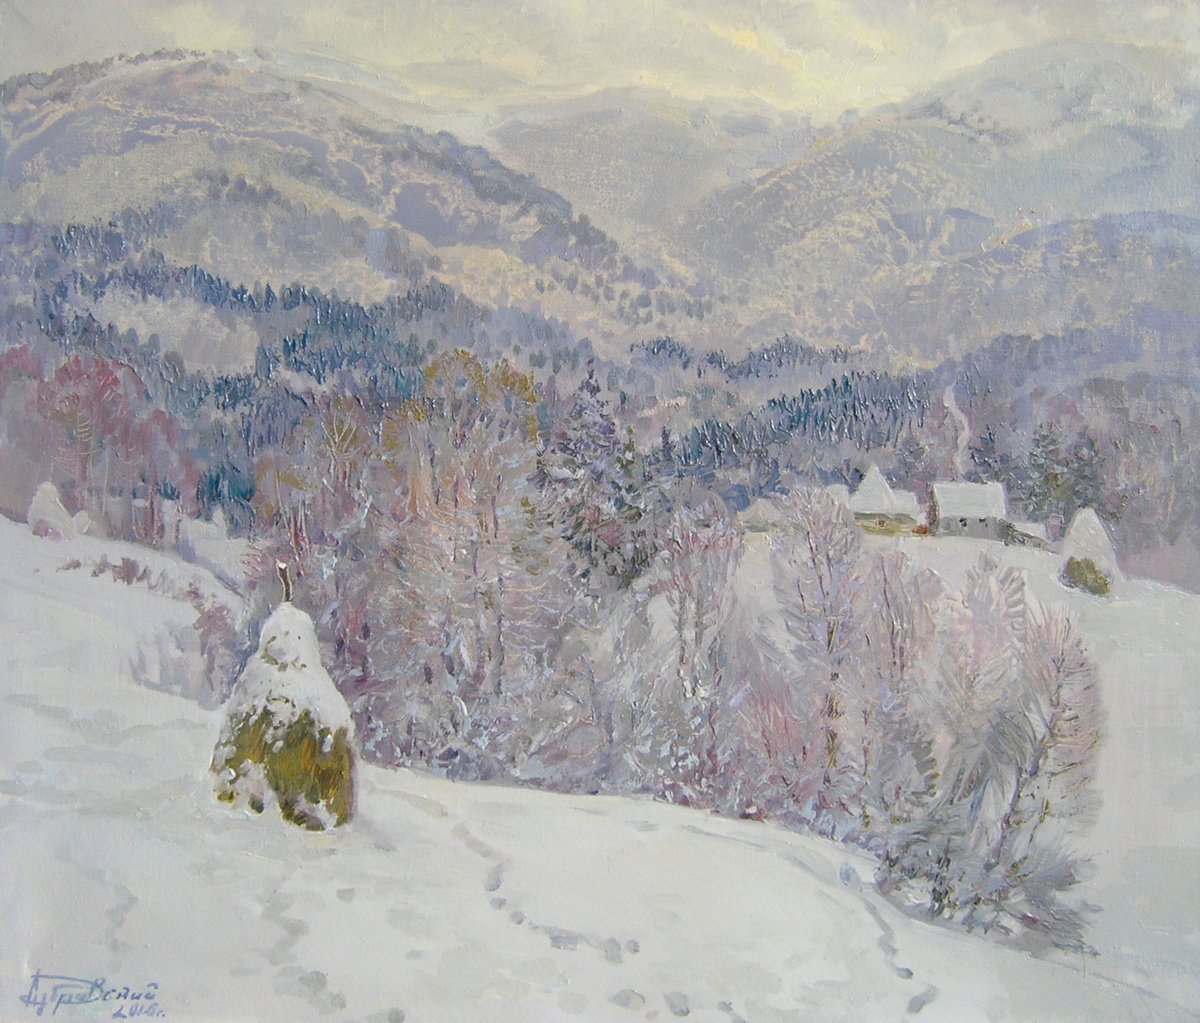 Winter in the mountains by Aleksandr Dubrovskyy